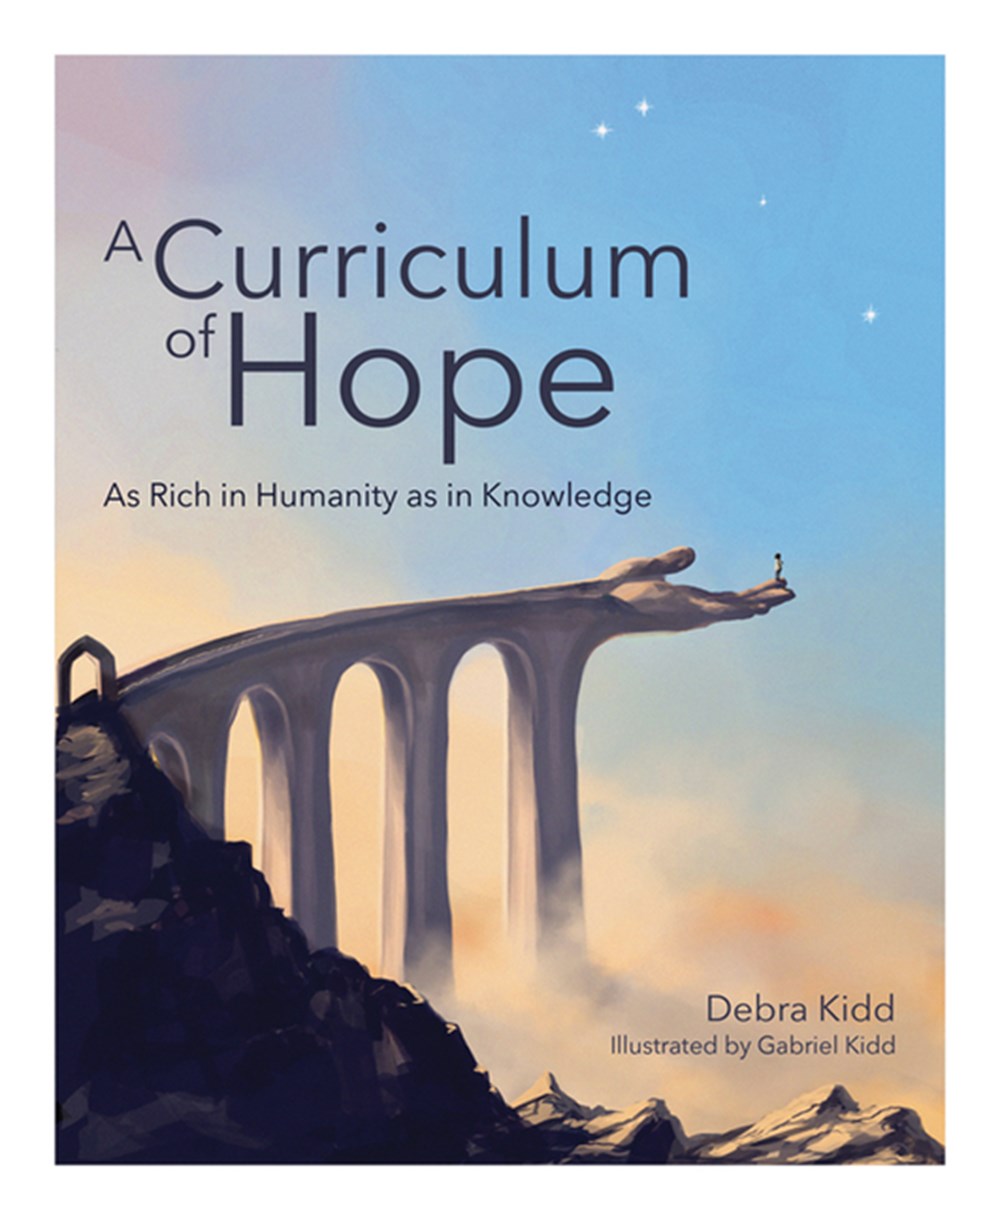 Curriculum of Hope: As Rich in Humanity as in Knowledge